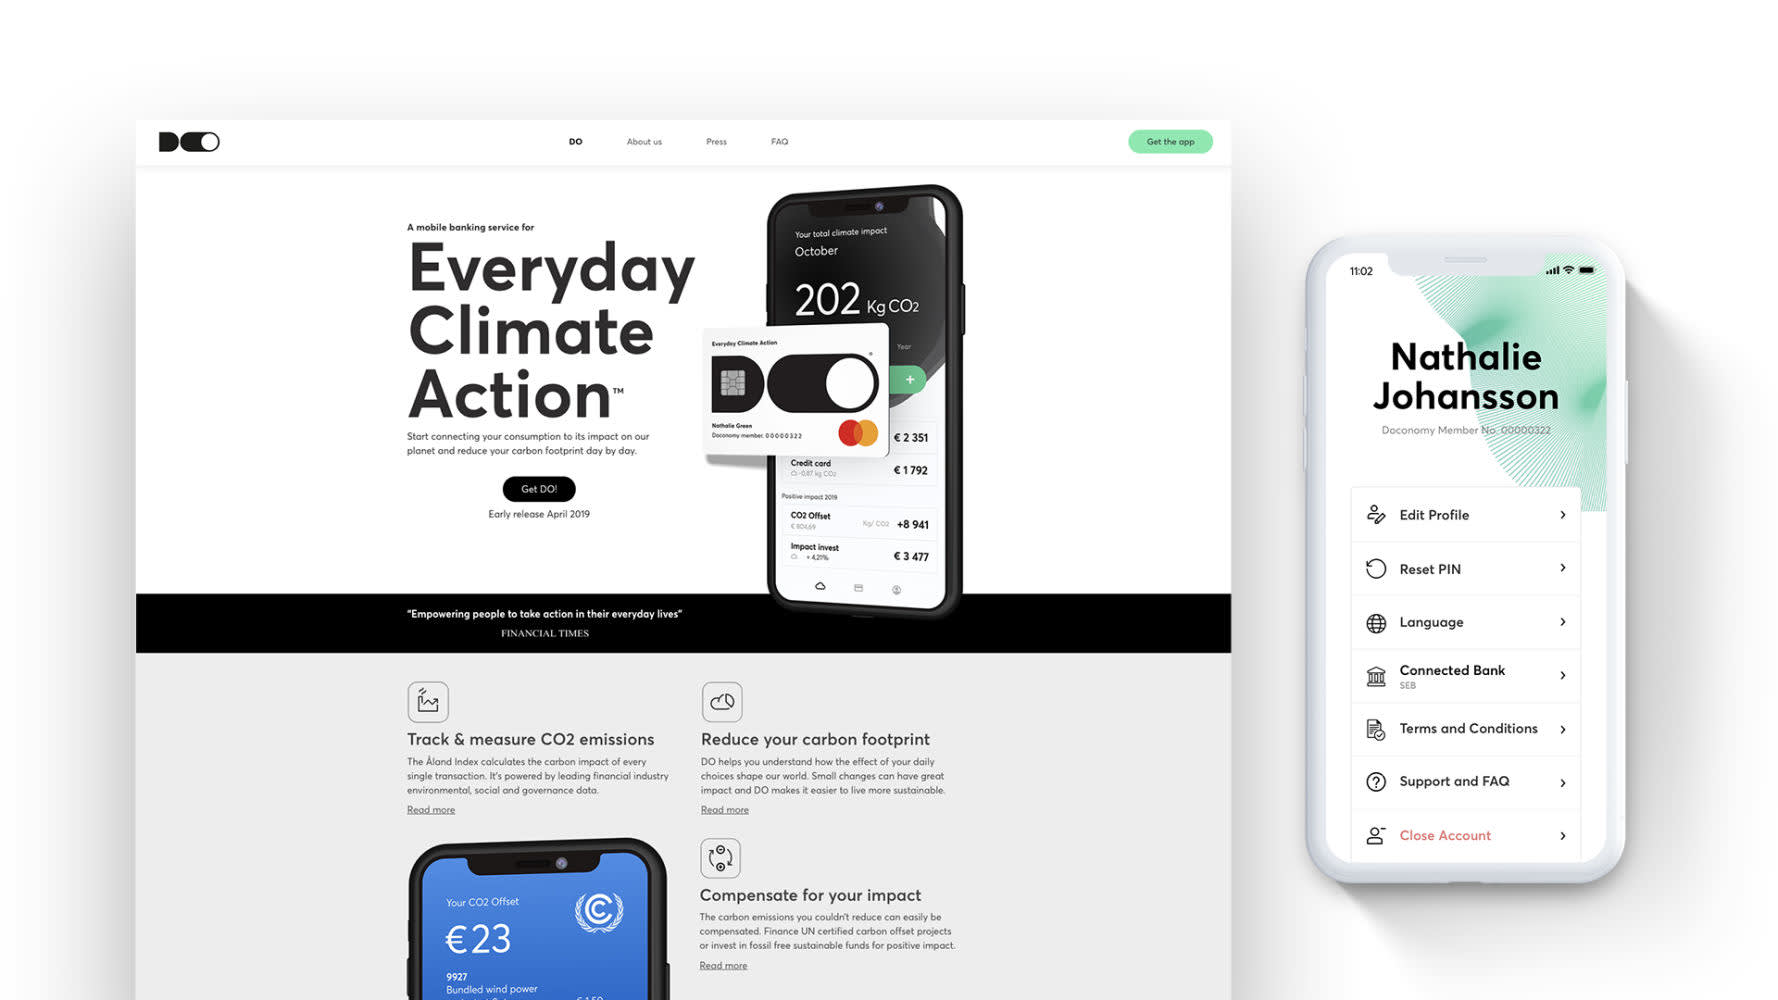 Desktop and mobile screens of the app to tackle climate change.